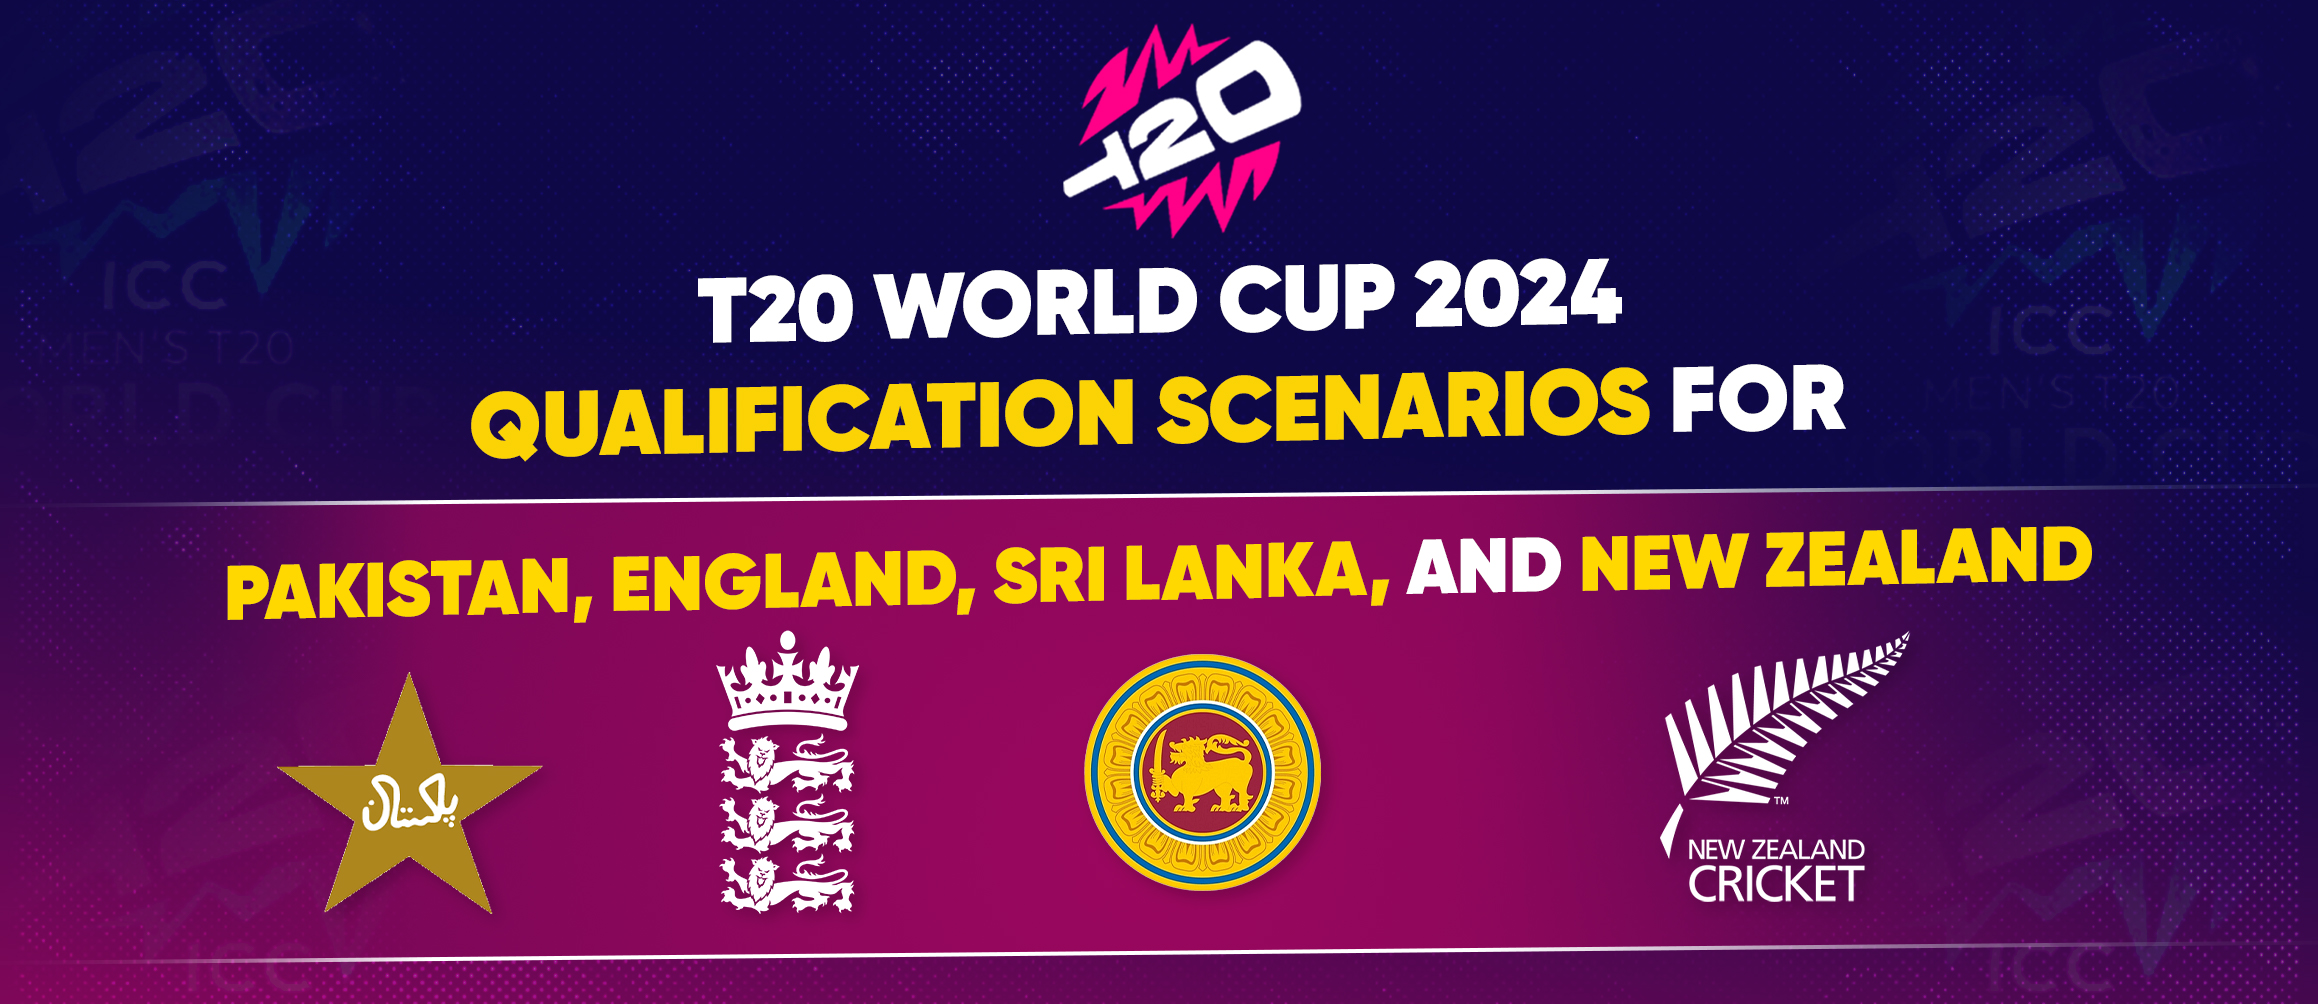 T20 World Cup 2024: Qualification Scenarios for Pakistan, England, Sri Lanka, and New Zealand